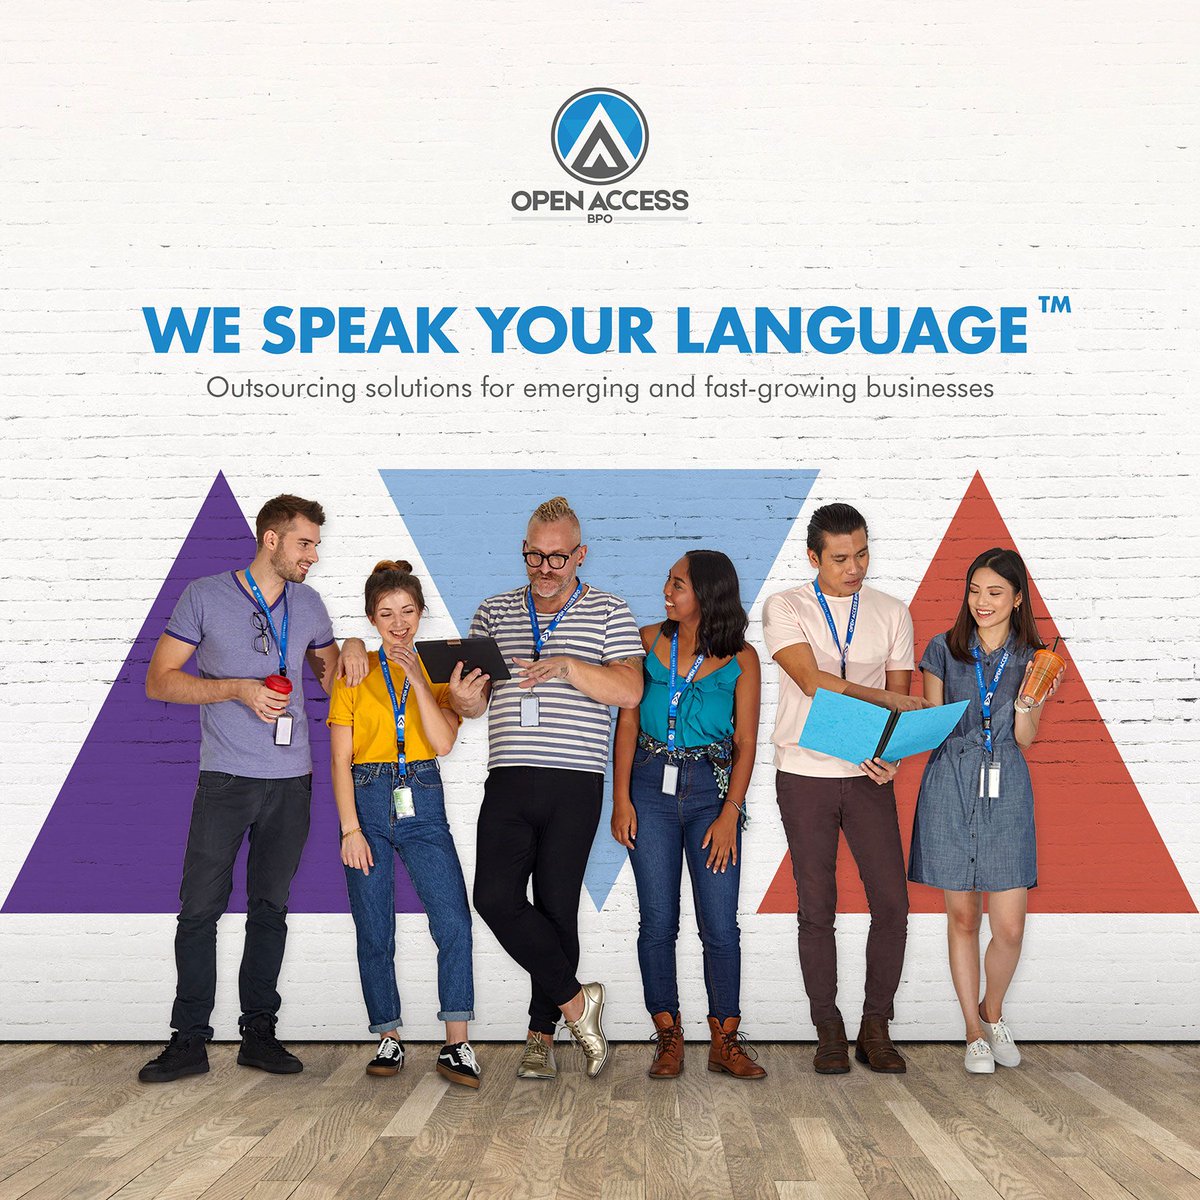 Learn more about our company culture and the many benefits we offer our employees by visiting our website today: buff.ly/3QHvewc

#WeSpeakYourLanguage
#OneForHealth #IdeaHubOABPO
#EmployeeEngagement #WellnessAtWork
#HealthyWorkplace #MindfulnessAtWork